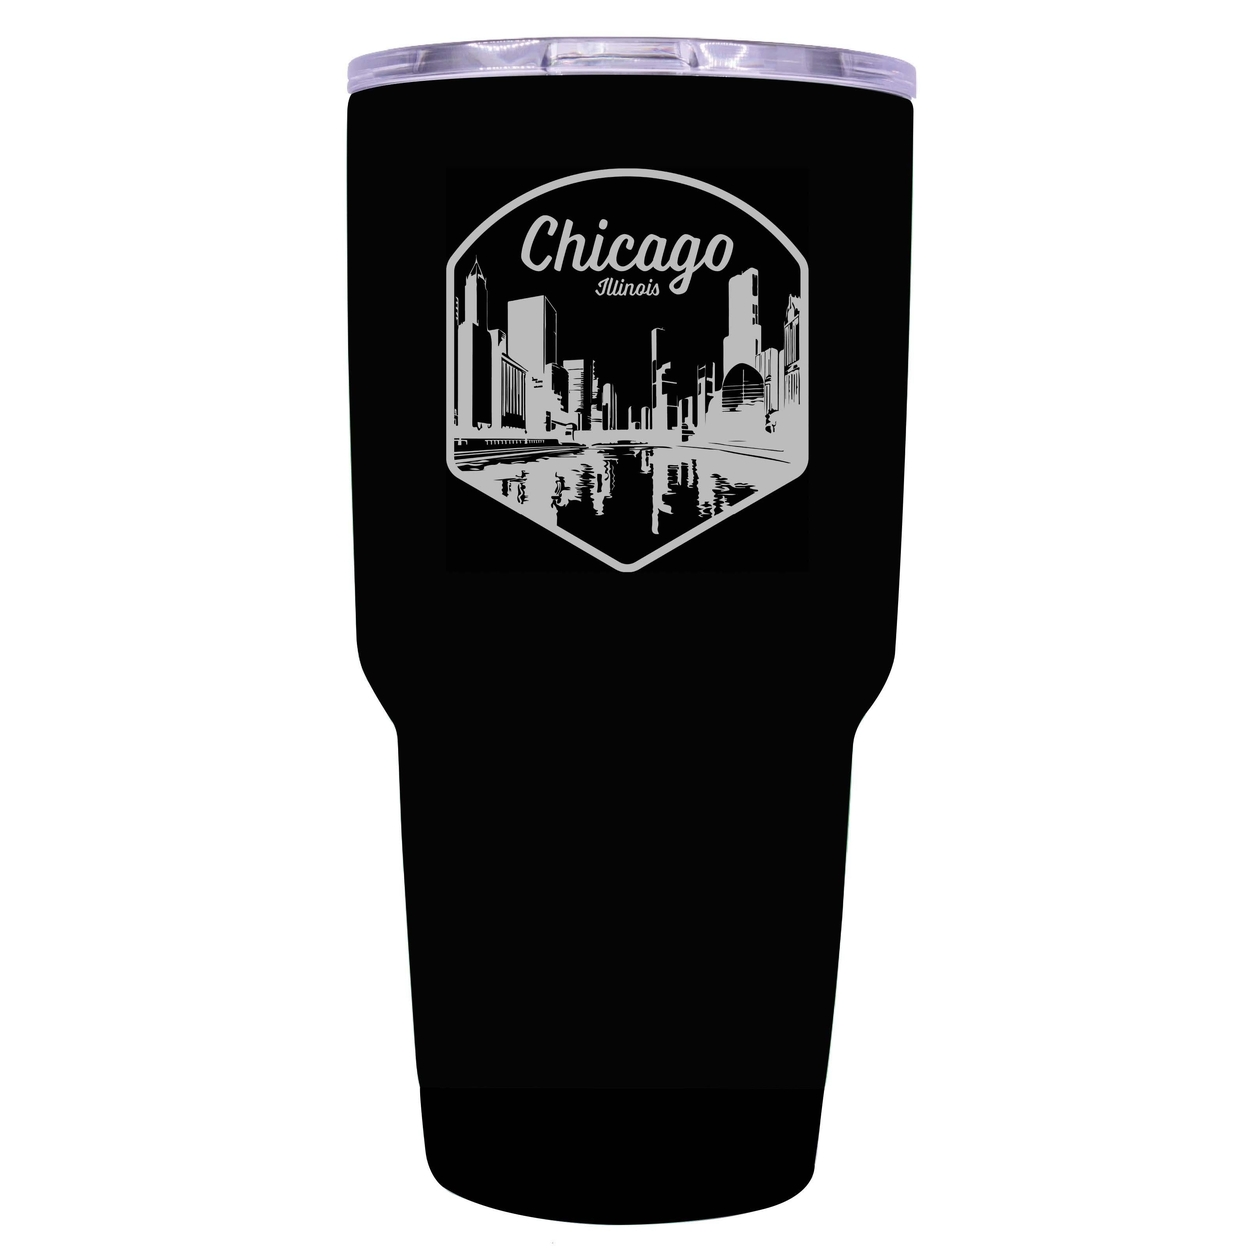 Chicago Illinois Souvenir 24 Oz Engraved Insulated Tumbler - Coral,,4-Pack